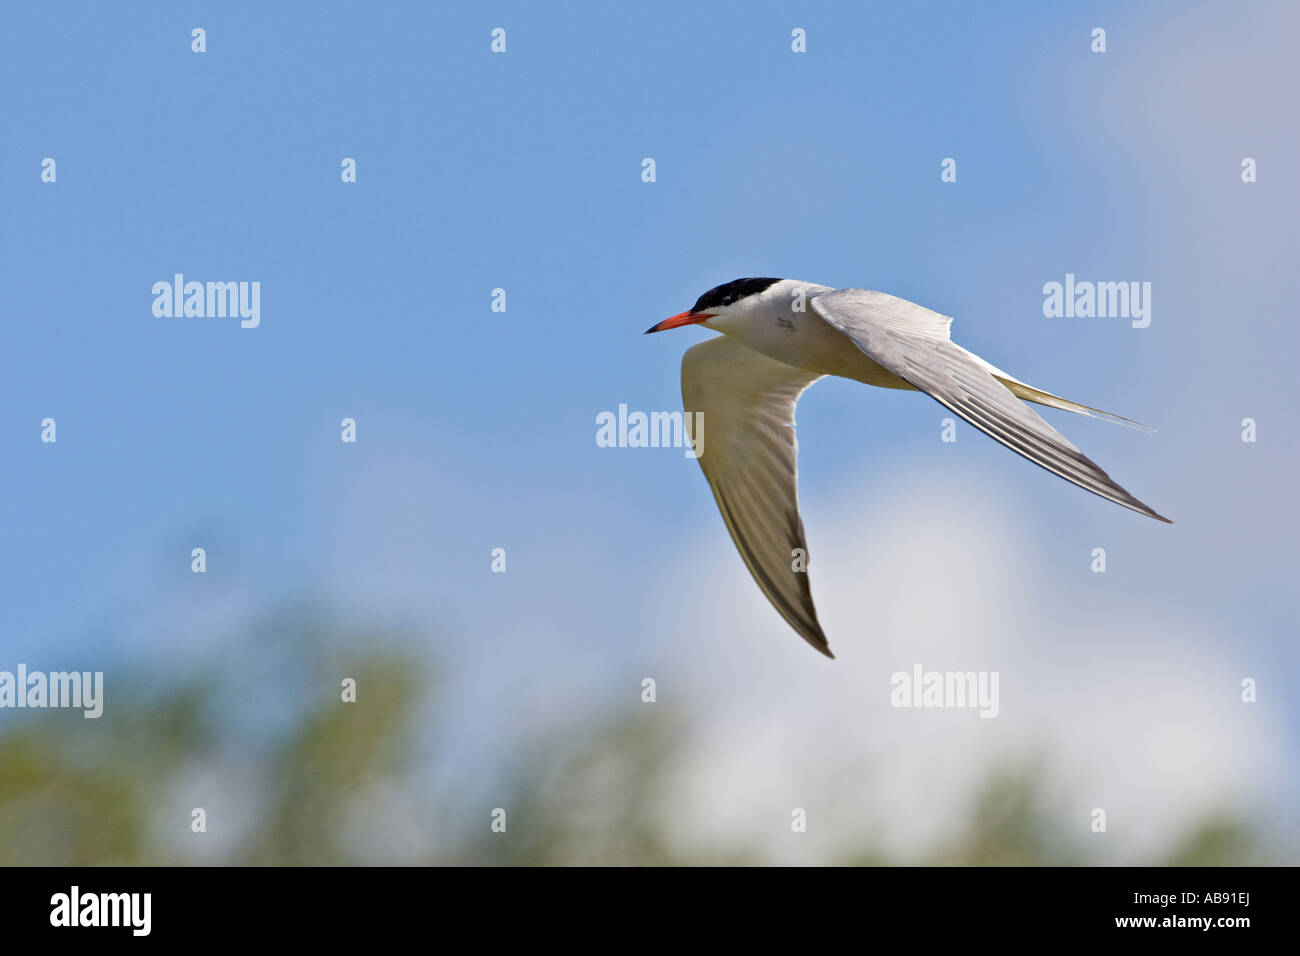 Common Tern Sterna hirundo in flight wings out with blue sky background Priory park Bedford Bedfordshire Stock Photo